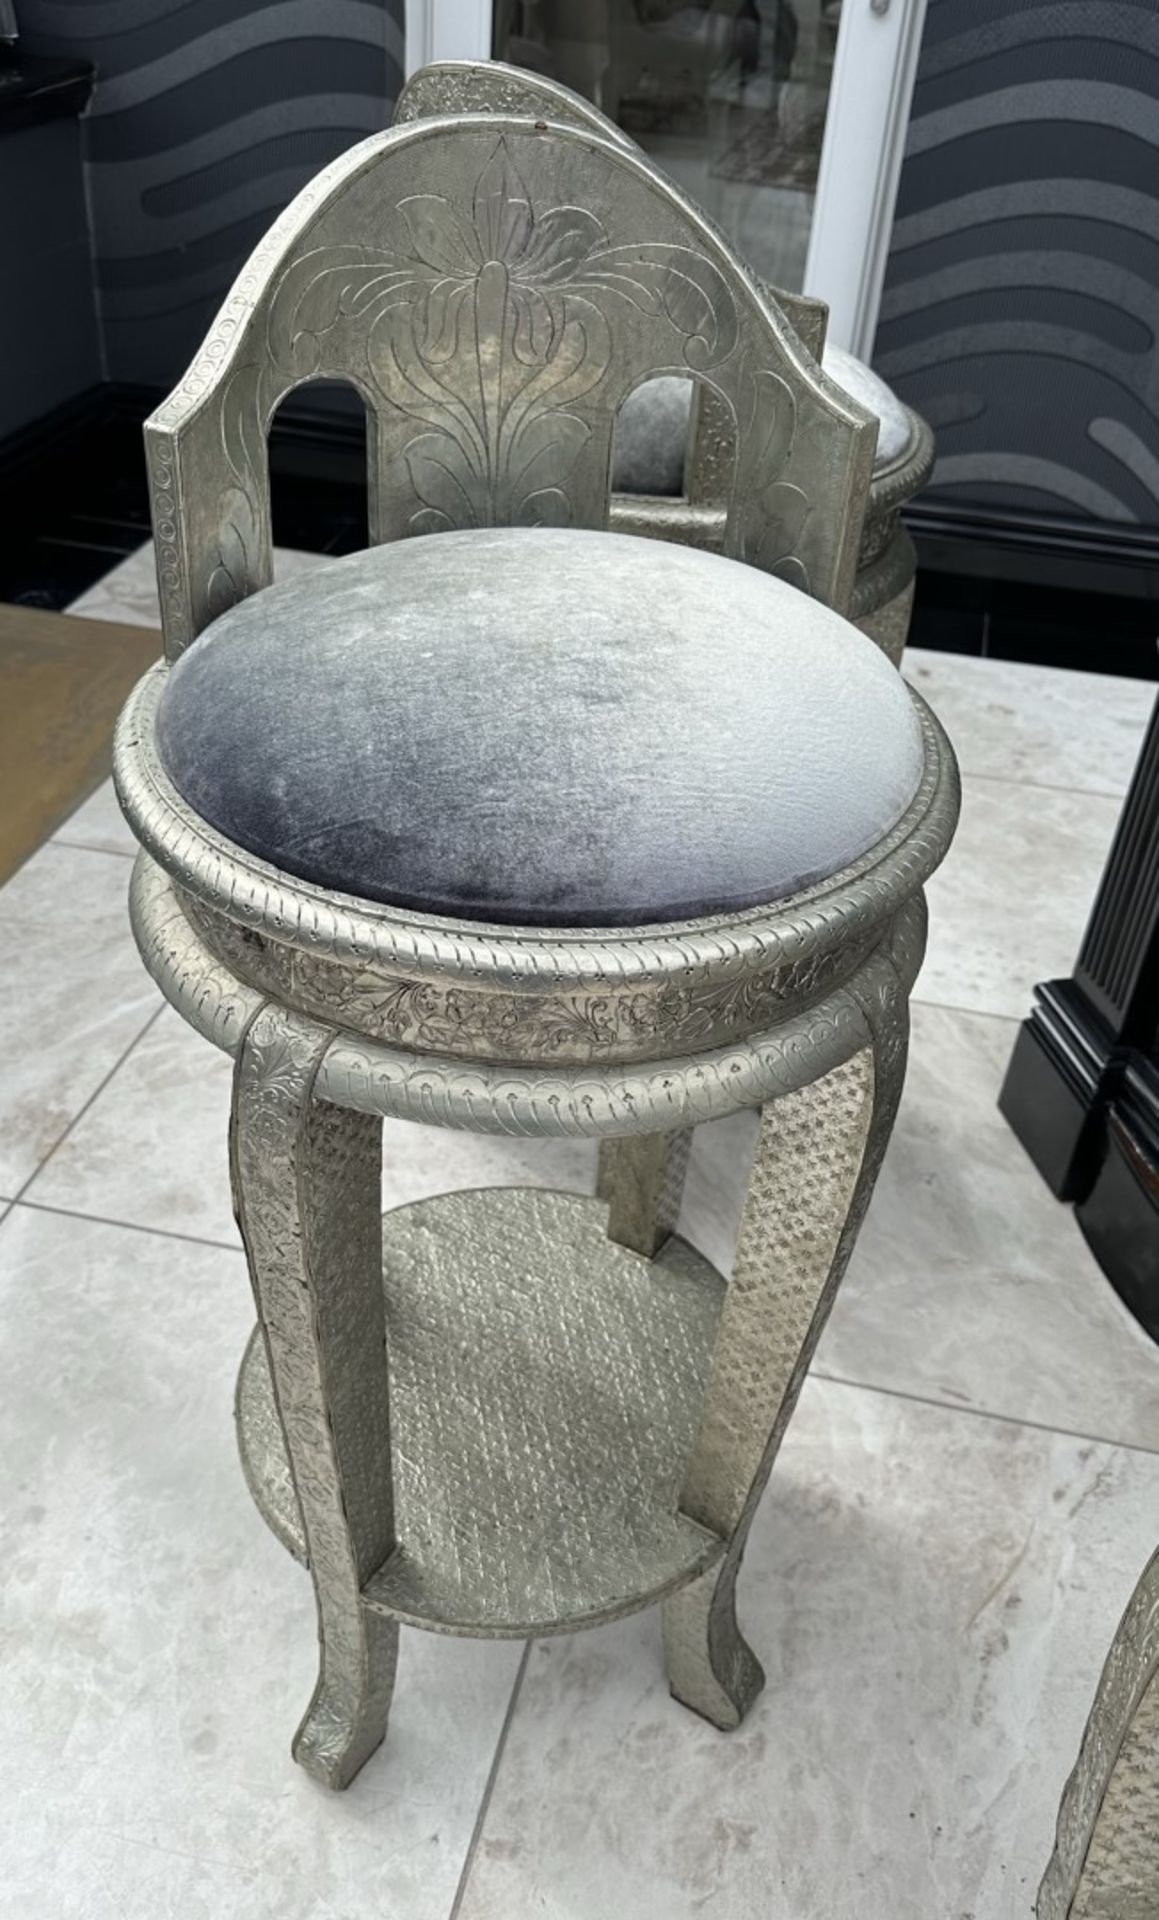 6 x Ornate Silver Tone Bar Stools With Grey Velvet Seat Pads - Image 6 of 16